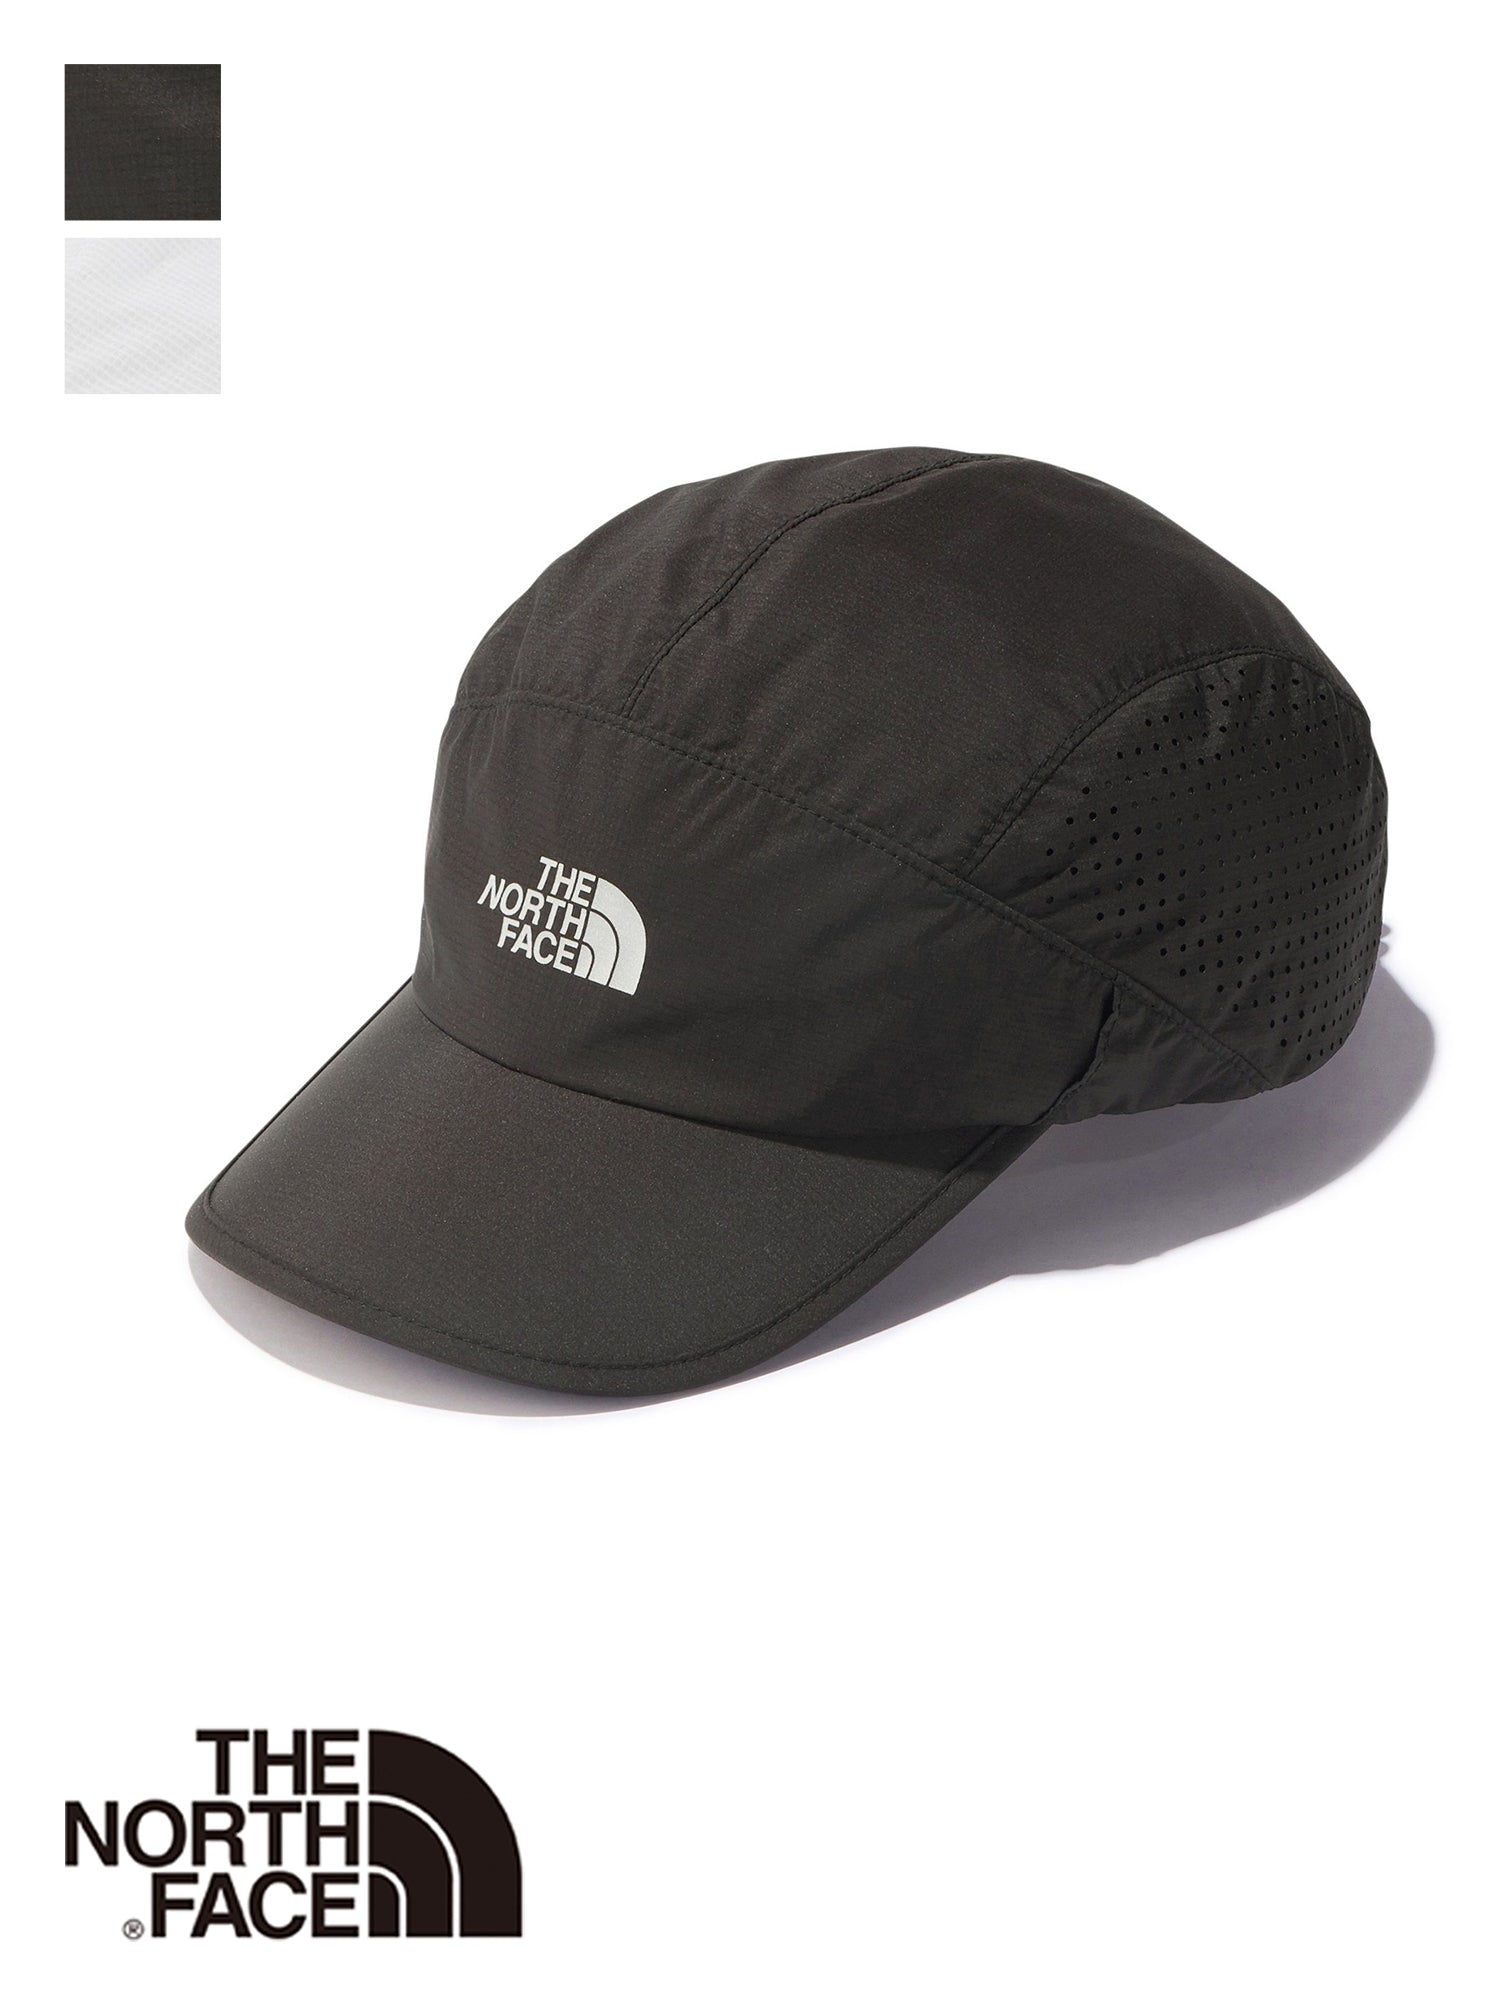 THE NORTH FACE] Swallowtail Cap / North Face Unisex Outdoor ...